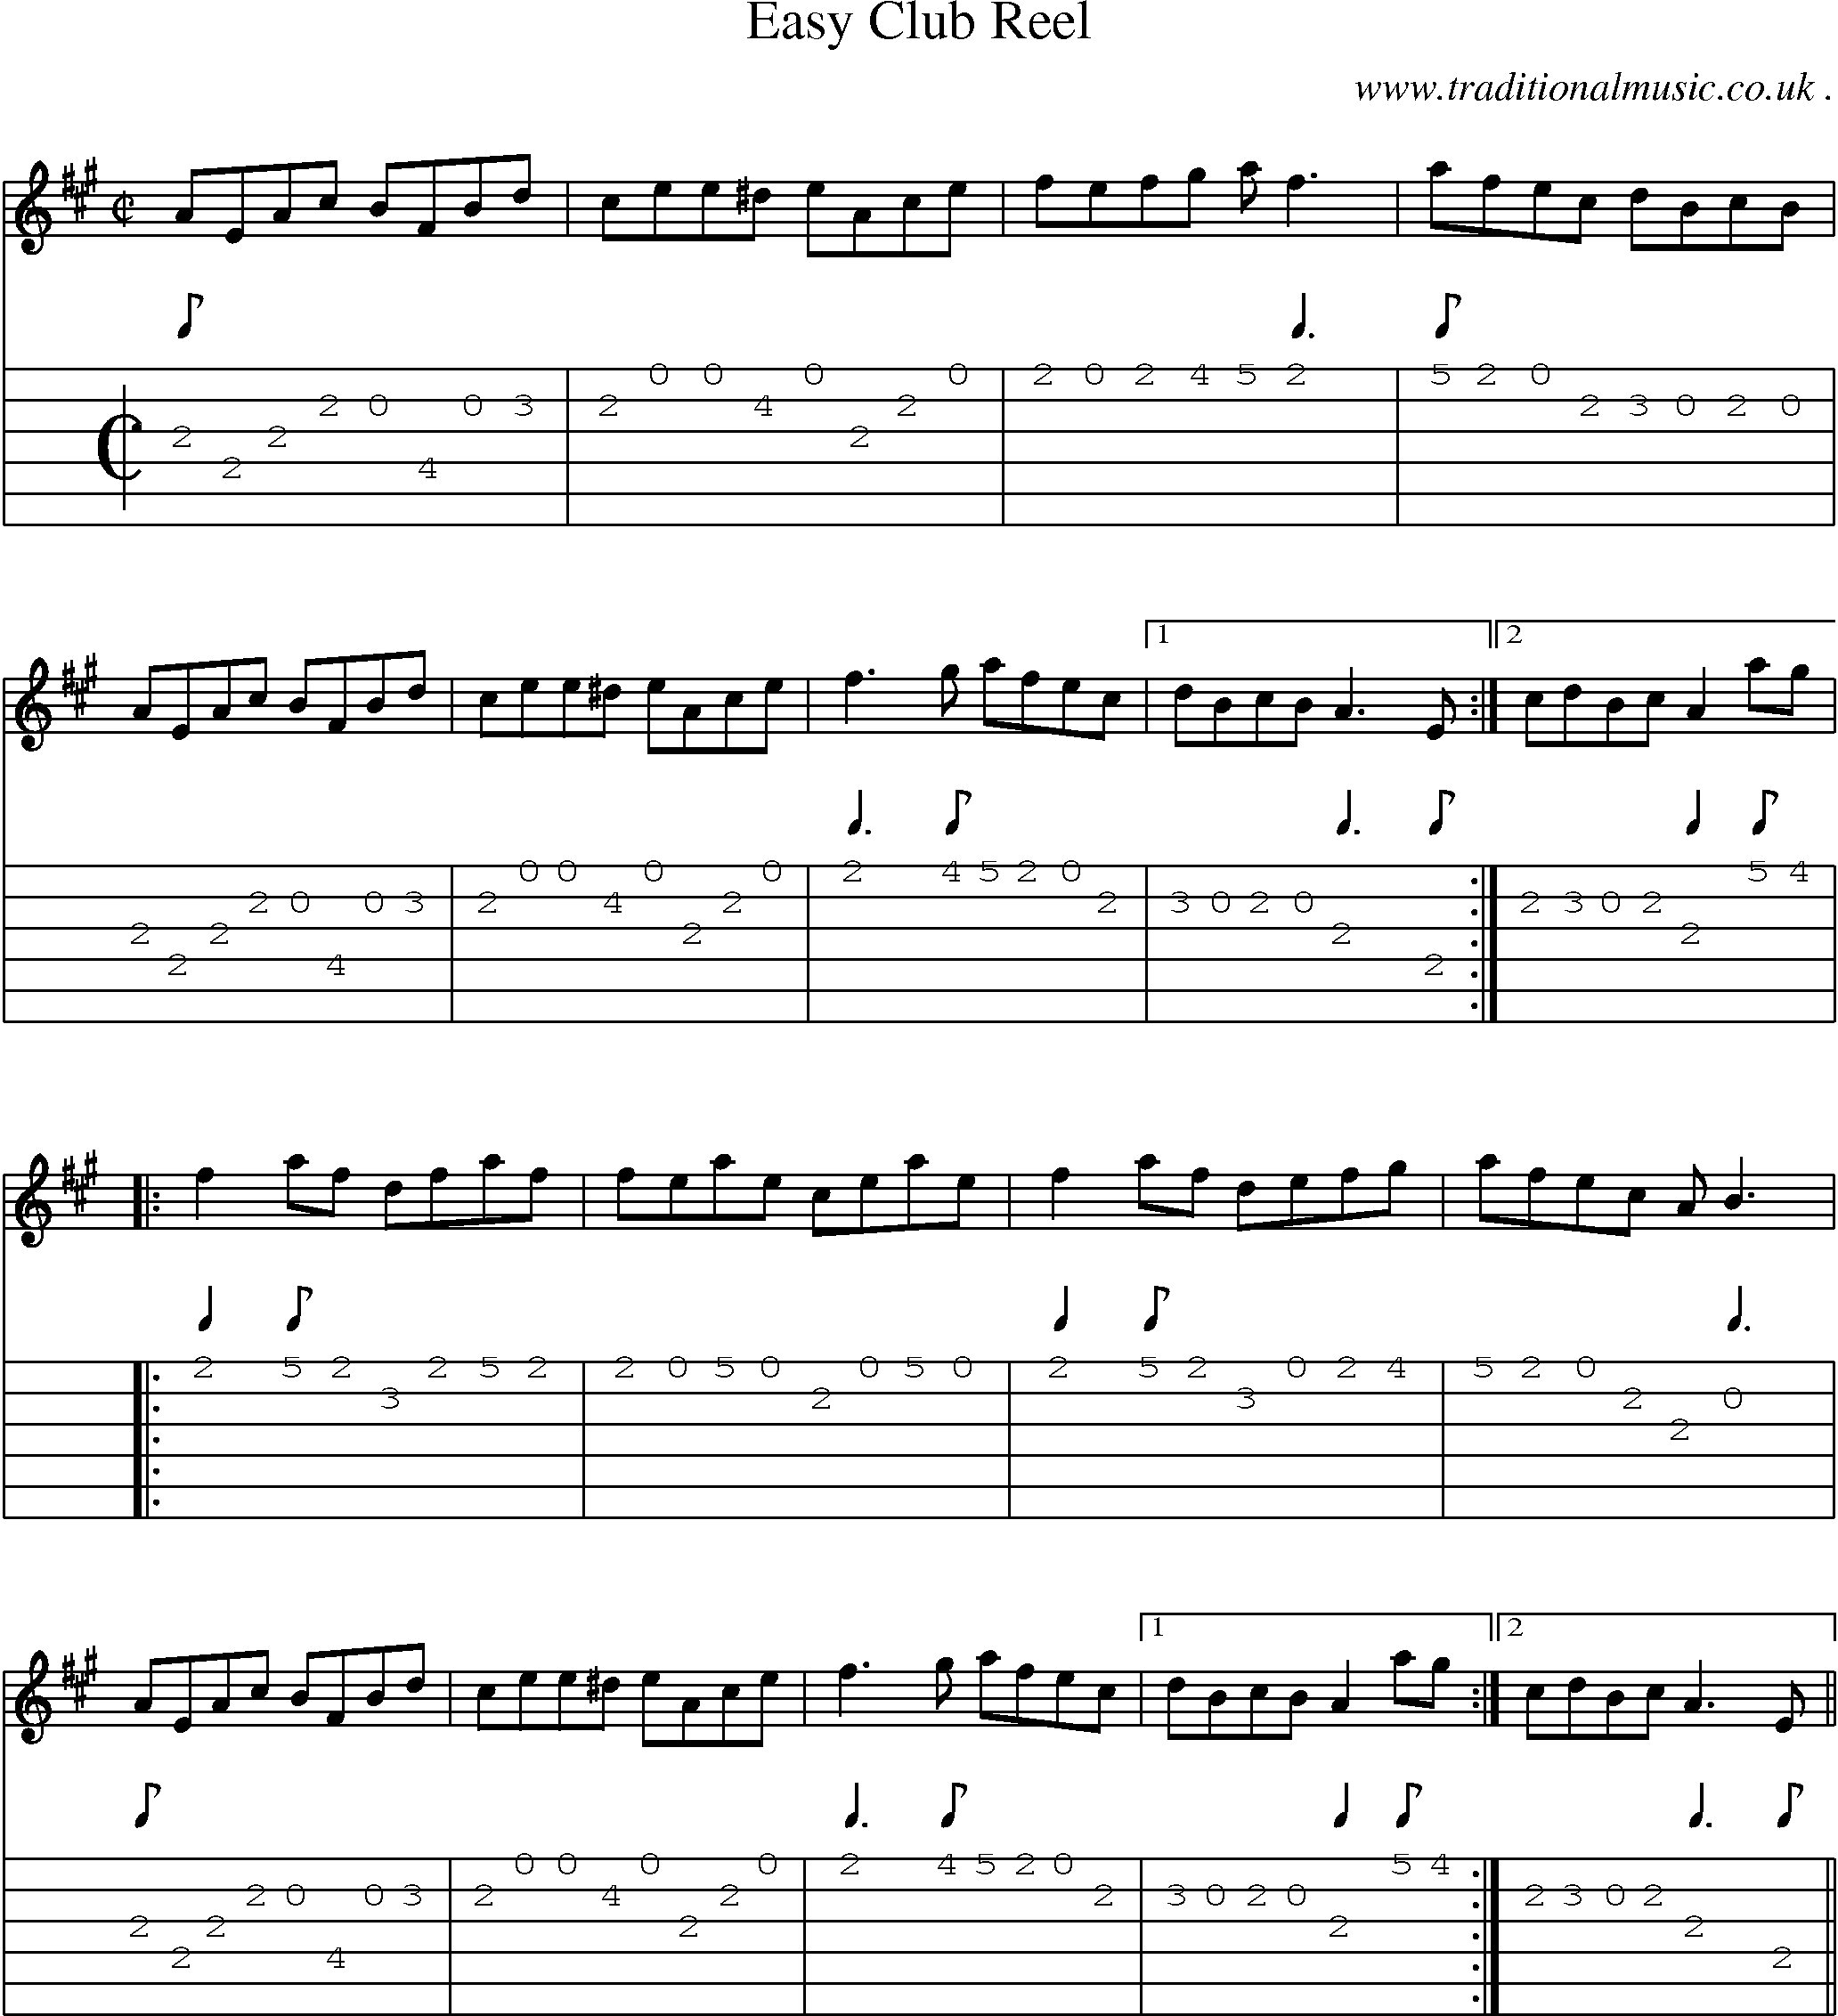 Sheet-Music and Guitar Tabs for Easy Club Reel